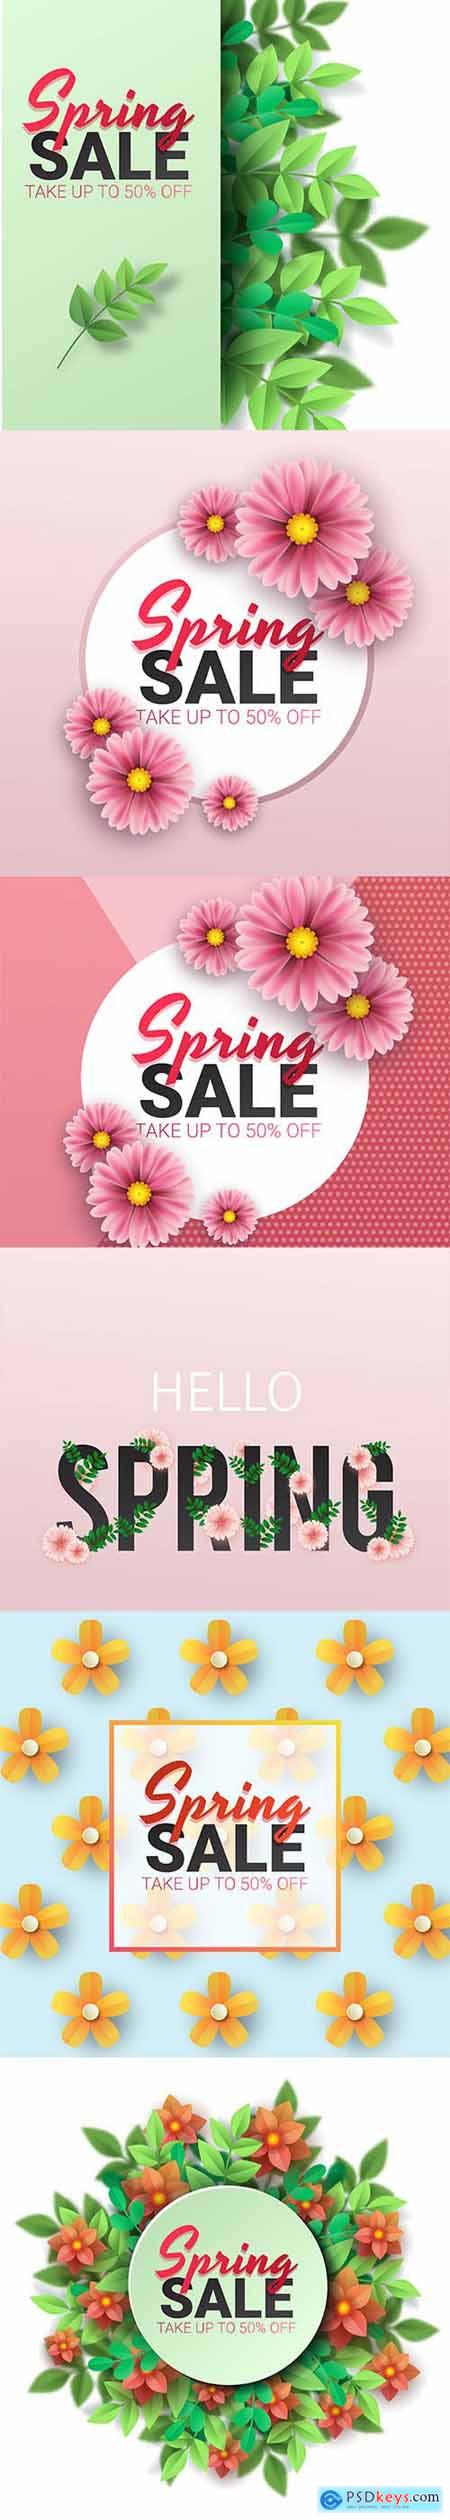 Spring Sale Floral Banner Vector Collection